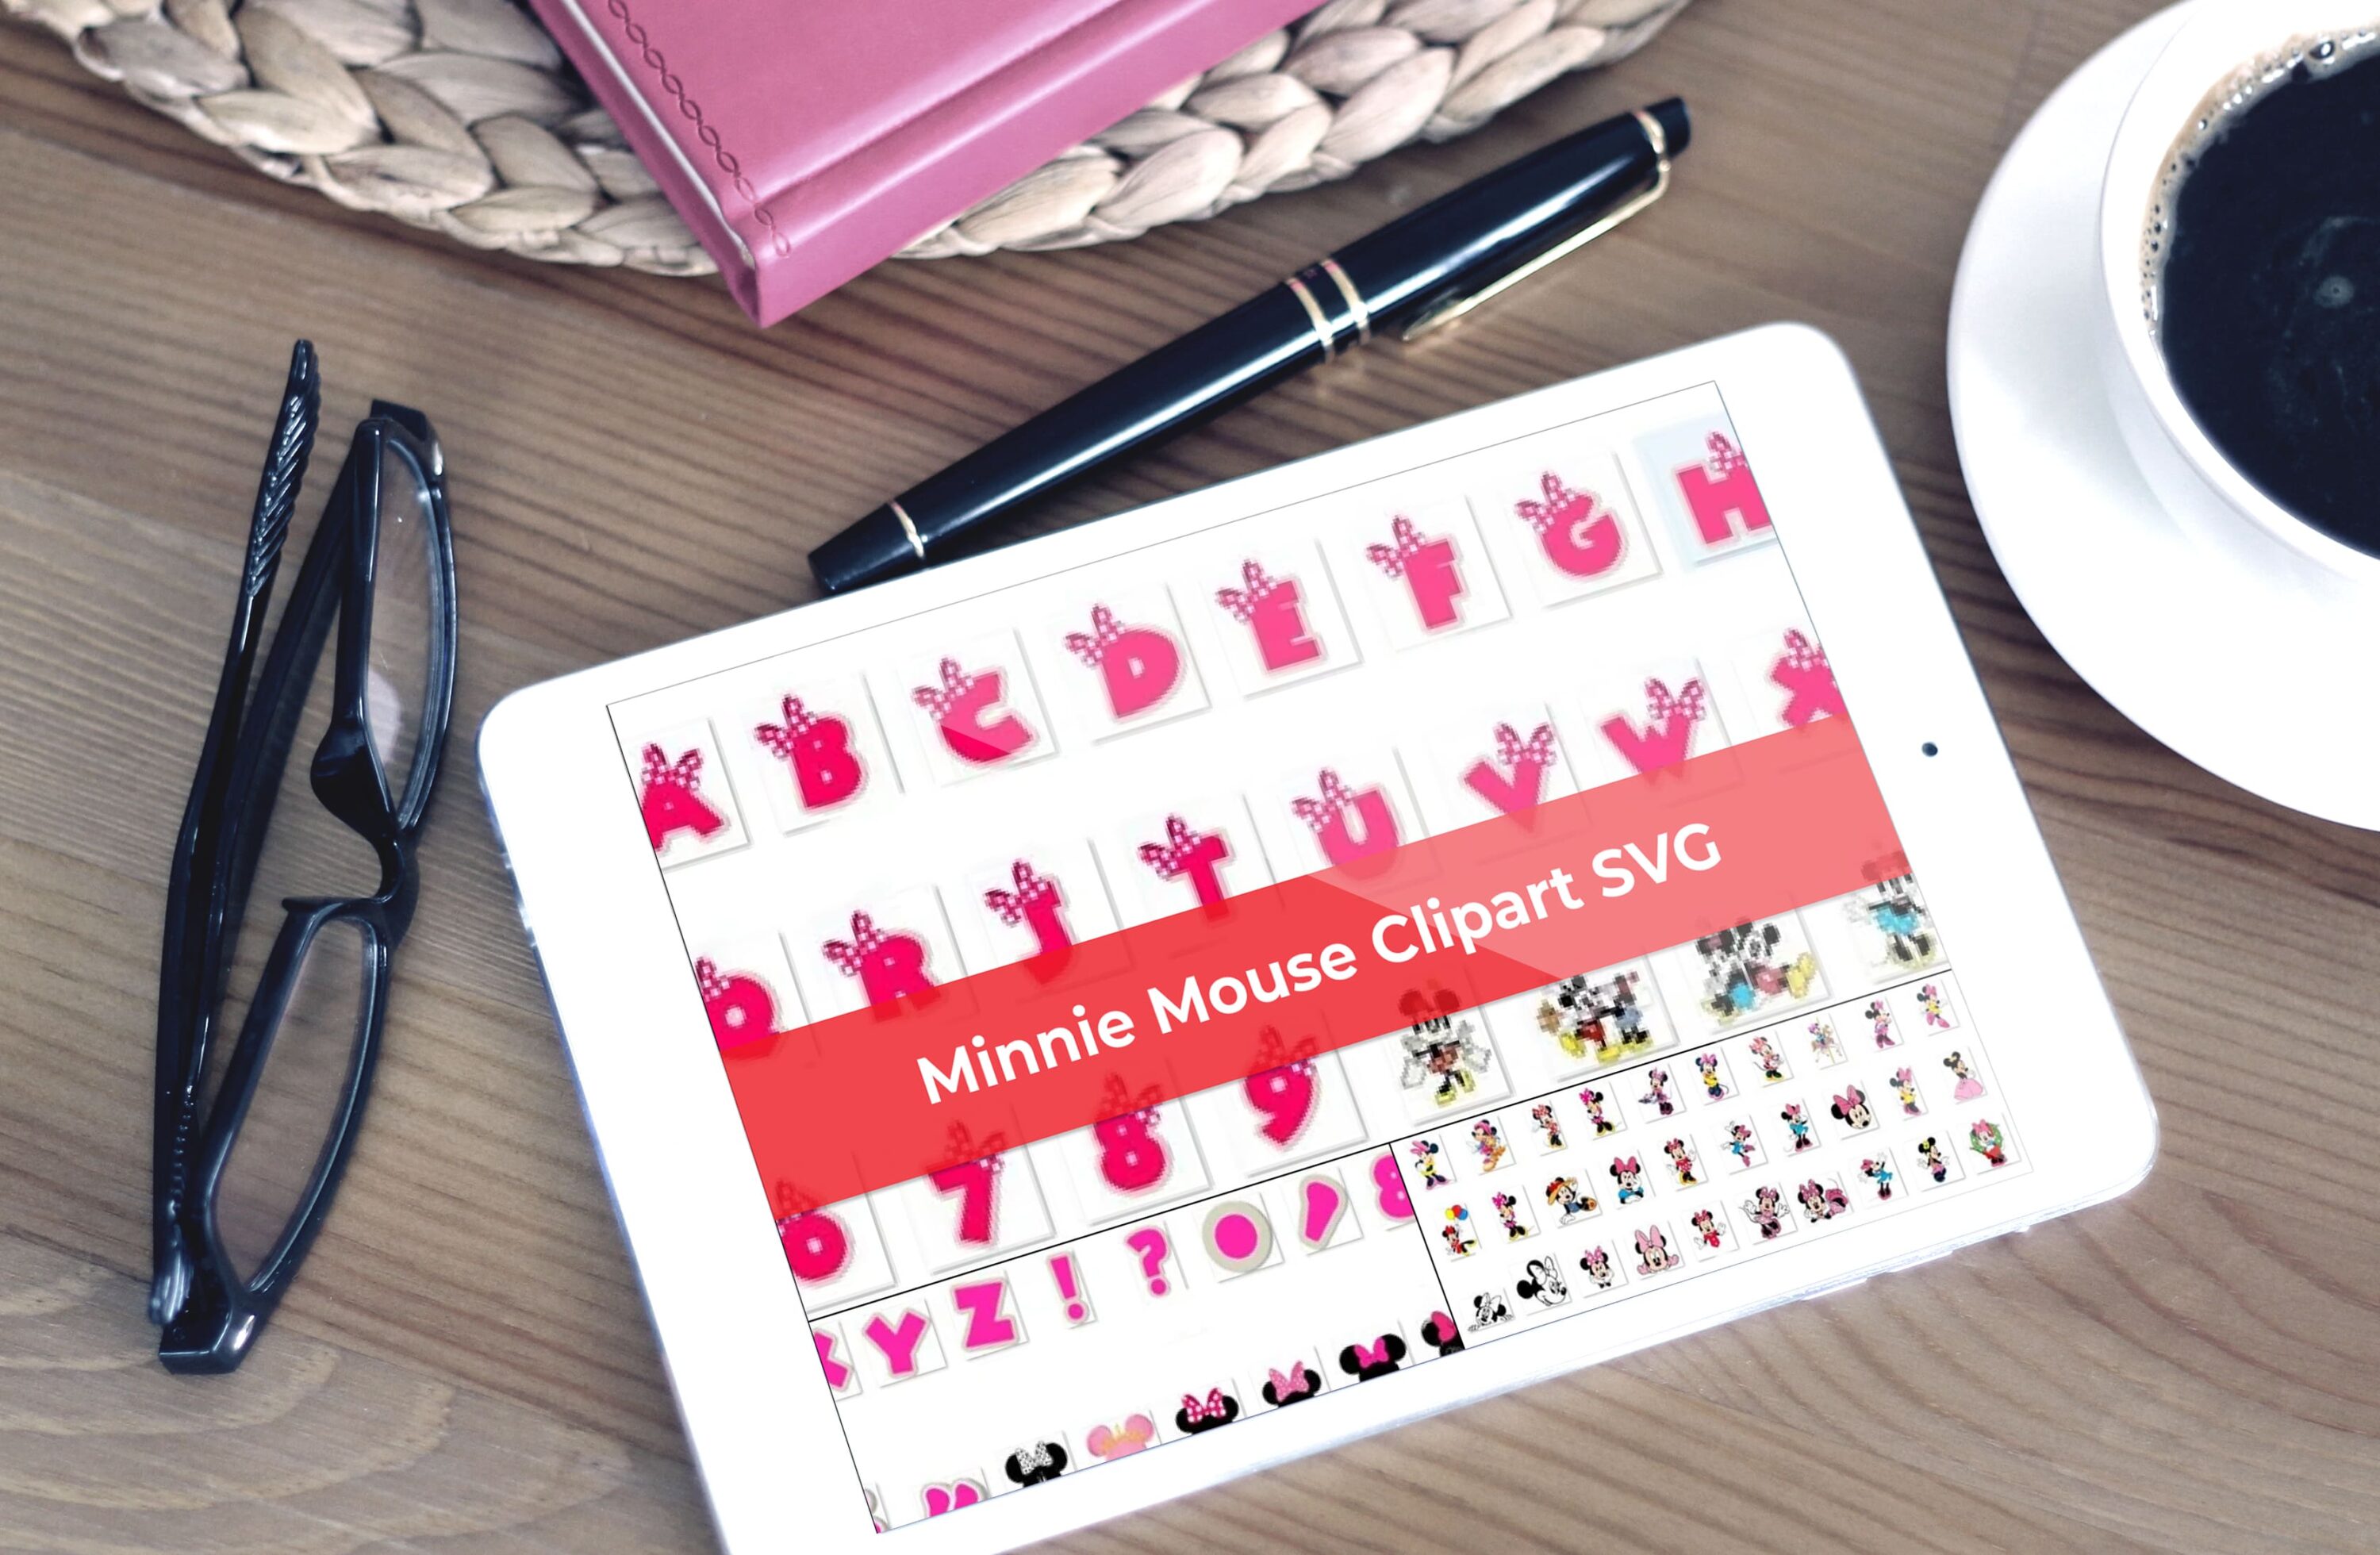 Tablet - Minnie Mouse Clipart SVG Digital Download.